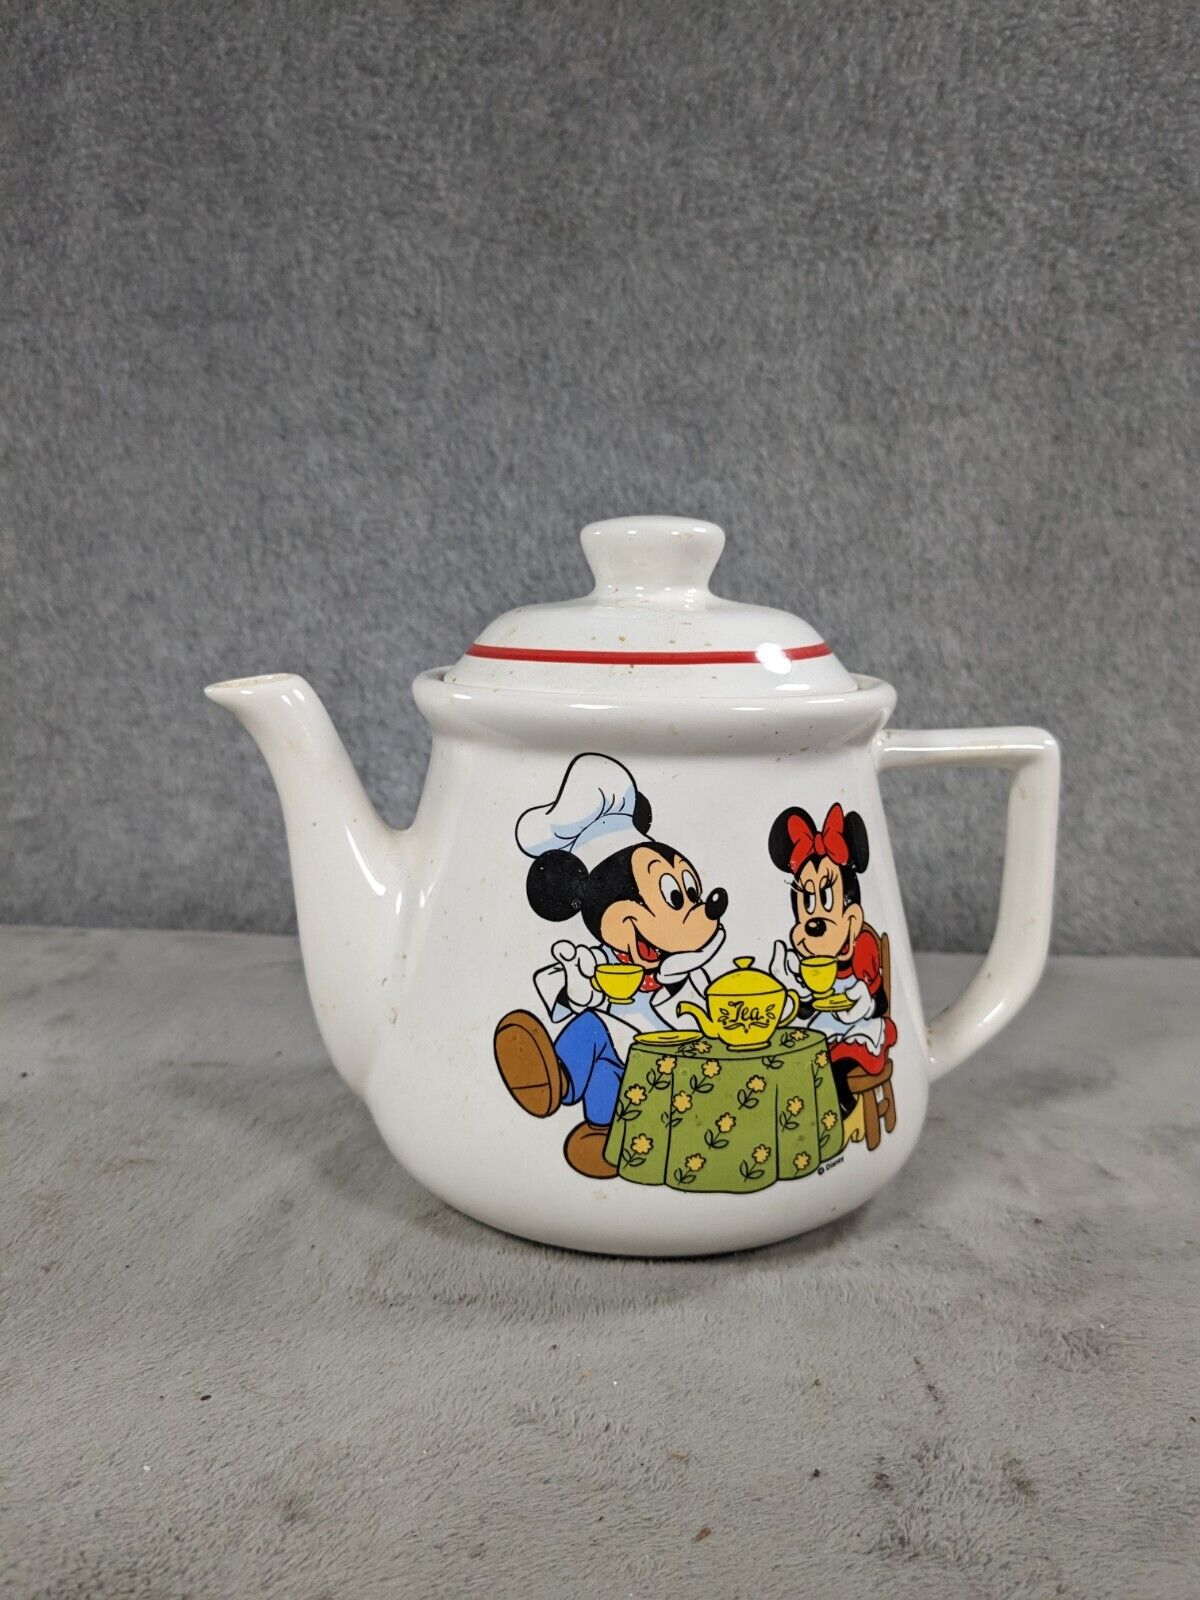 Vintage Disney Mickey Mouse And Minnie Mouse Tableware Collection Ceramic Teapot